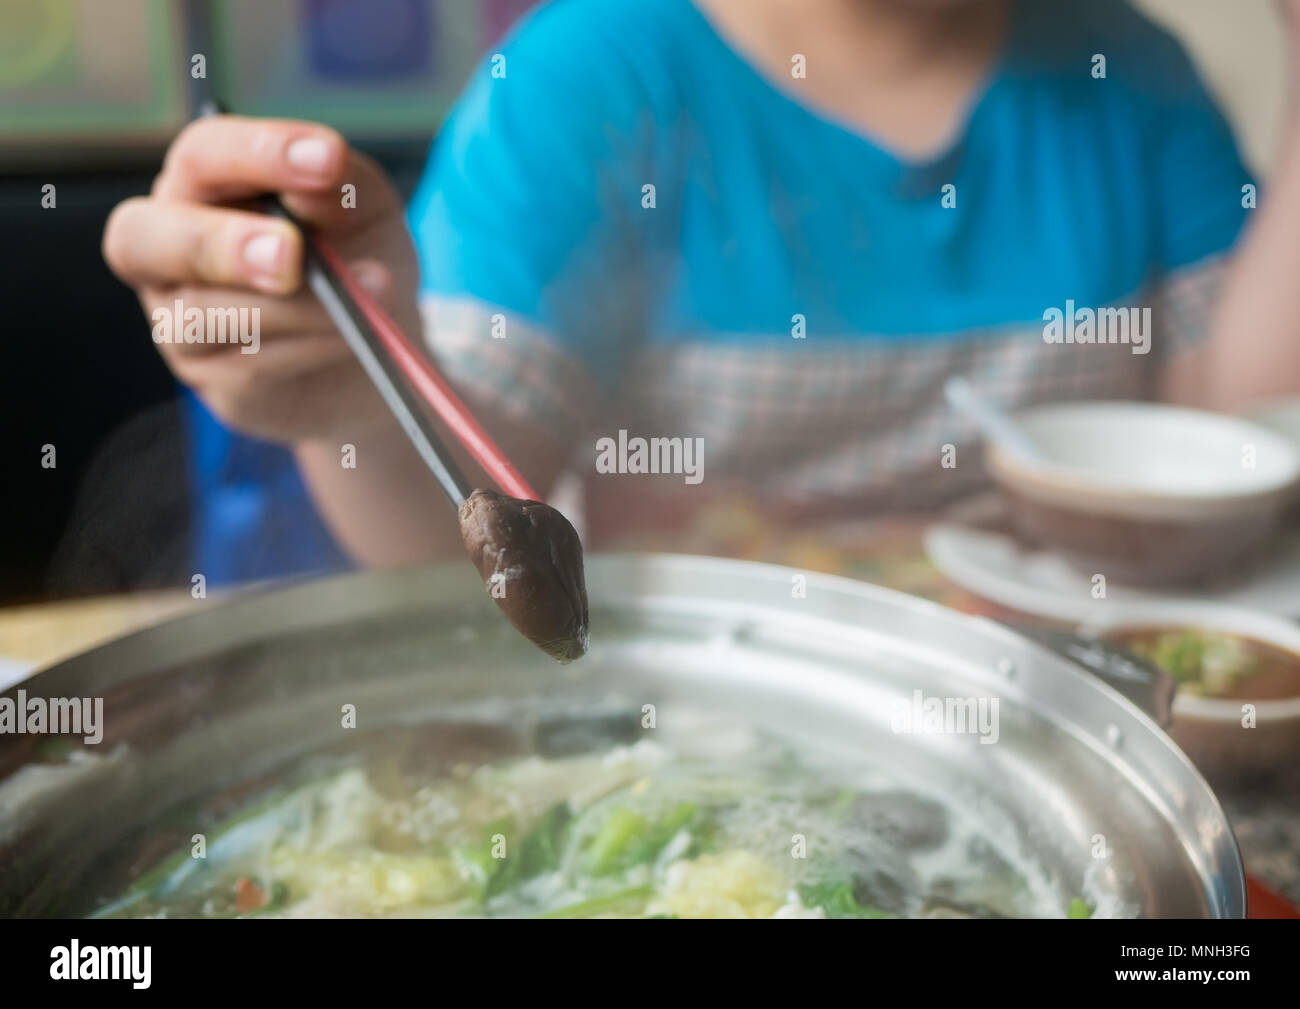 Blurred image muchroom in chopsticks on hand woman, Stock Photo